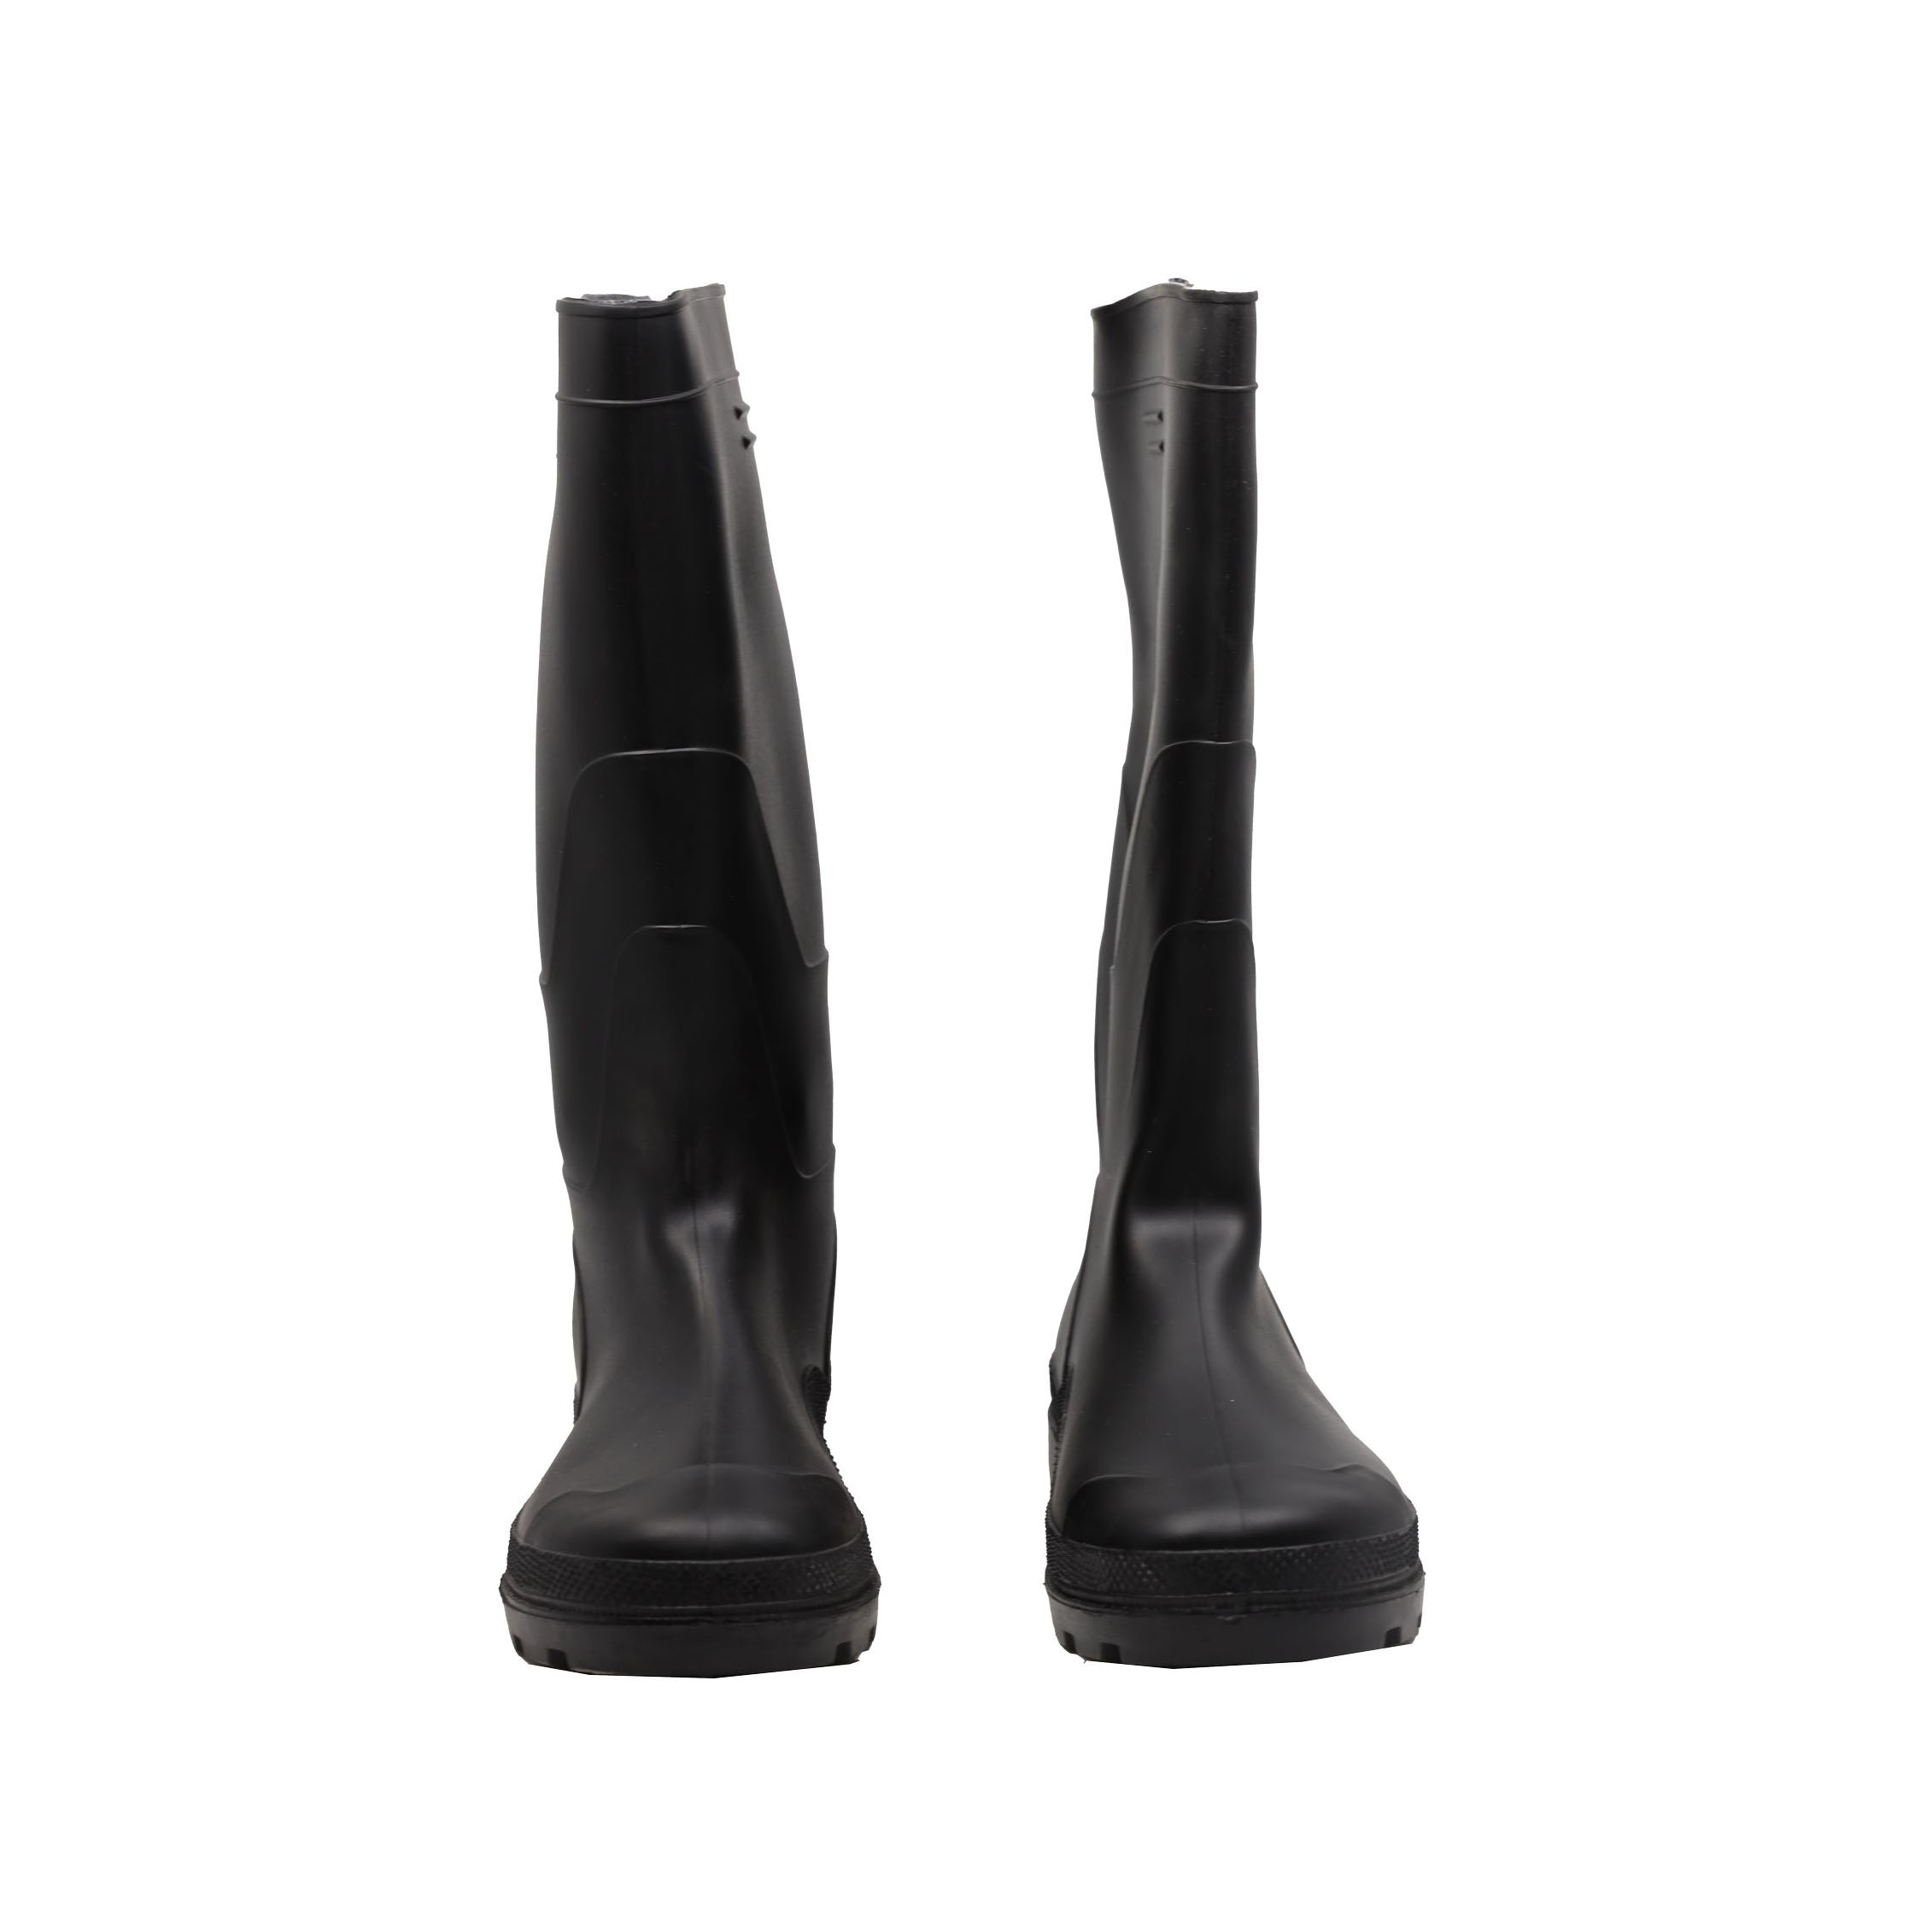 Buy RUBBER BOOTS - SIZE 43 - ITALY Online | Safety | Qetaat.com